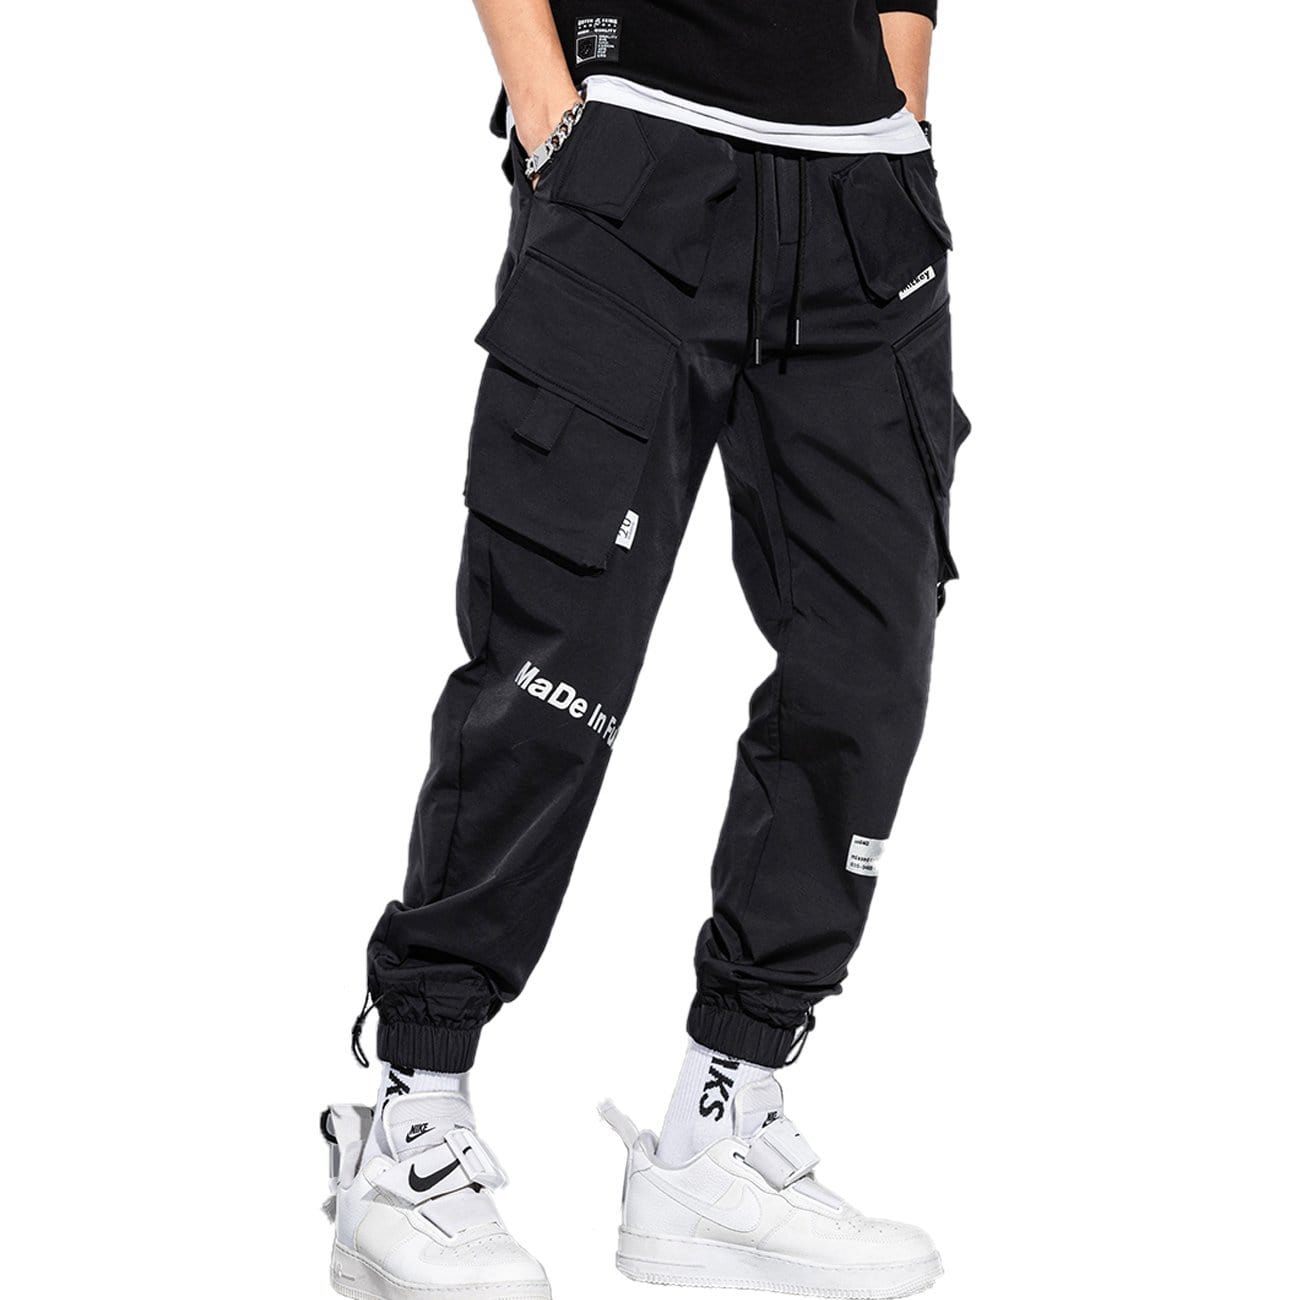 TO Reflective Side Pockets Ribbons Fleece Cargo Pants